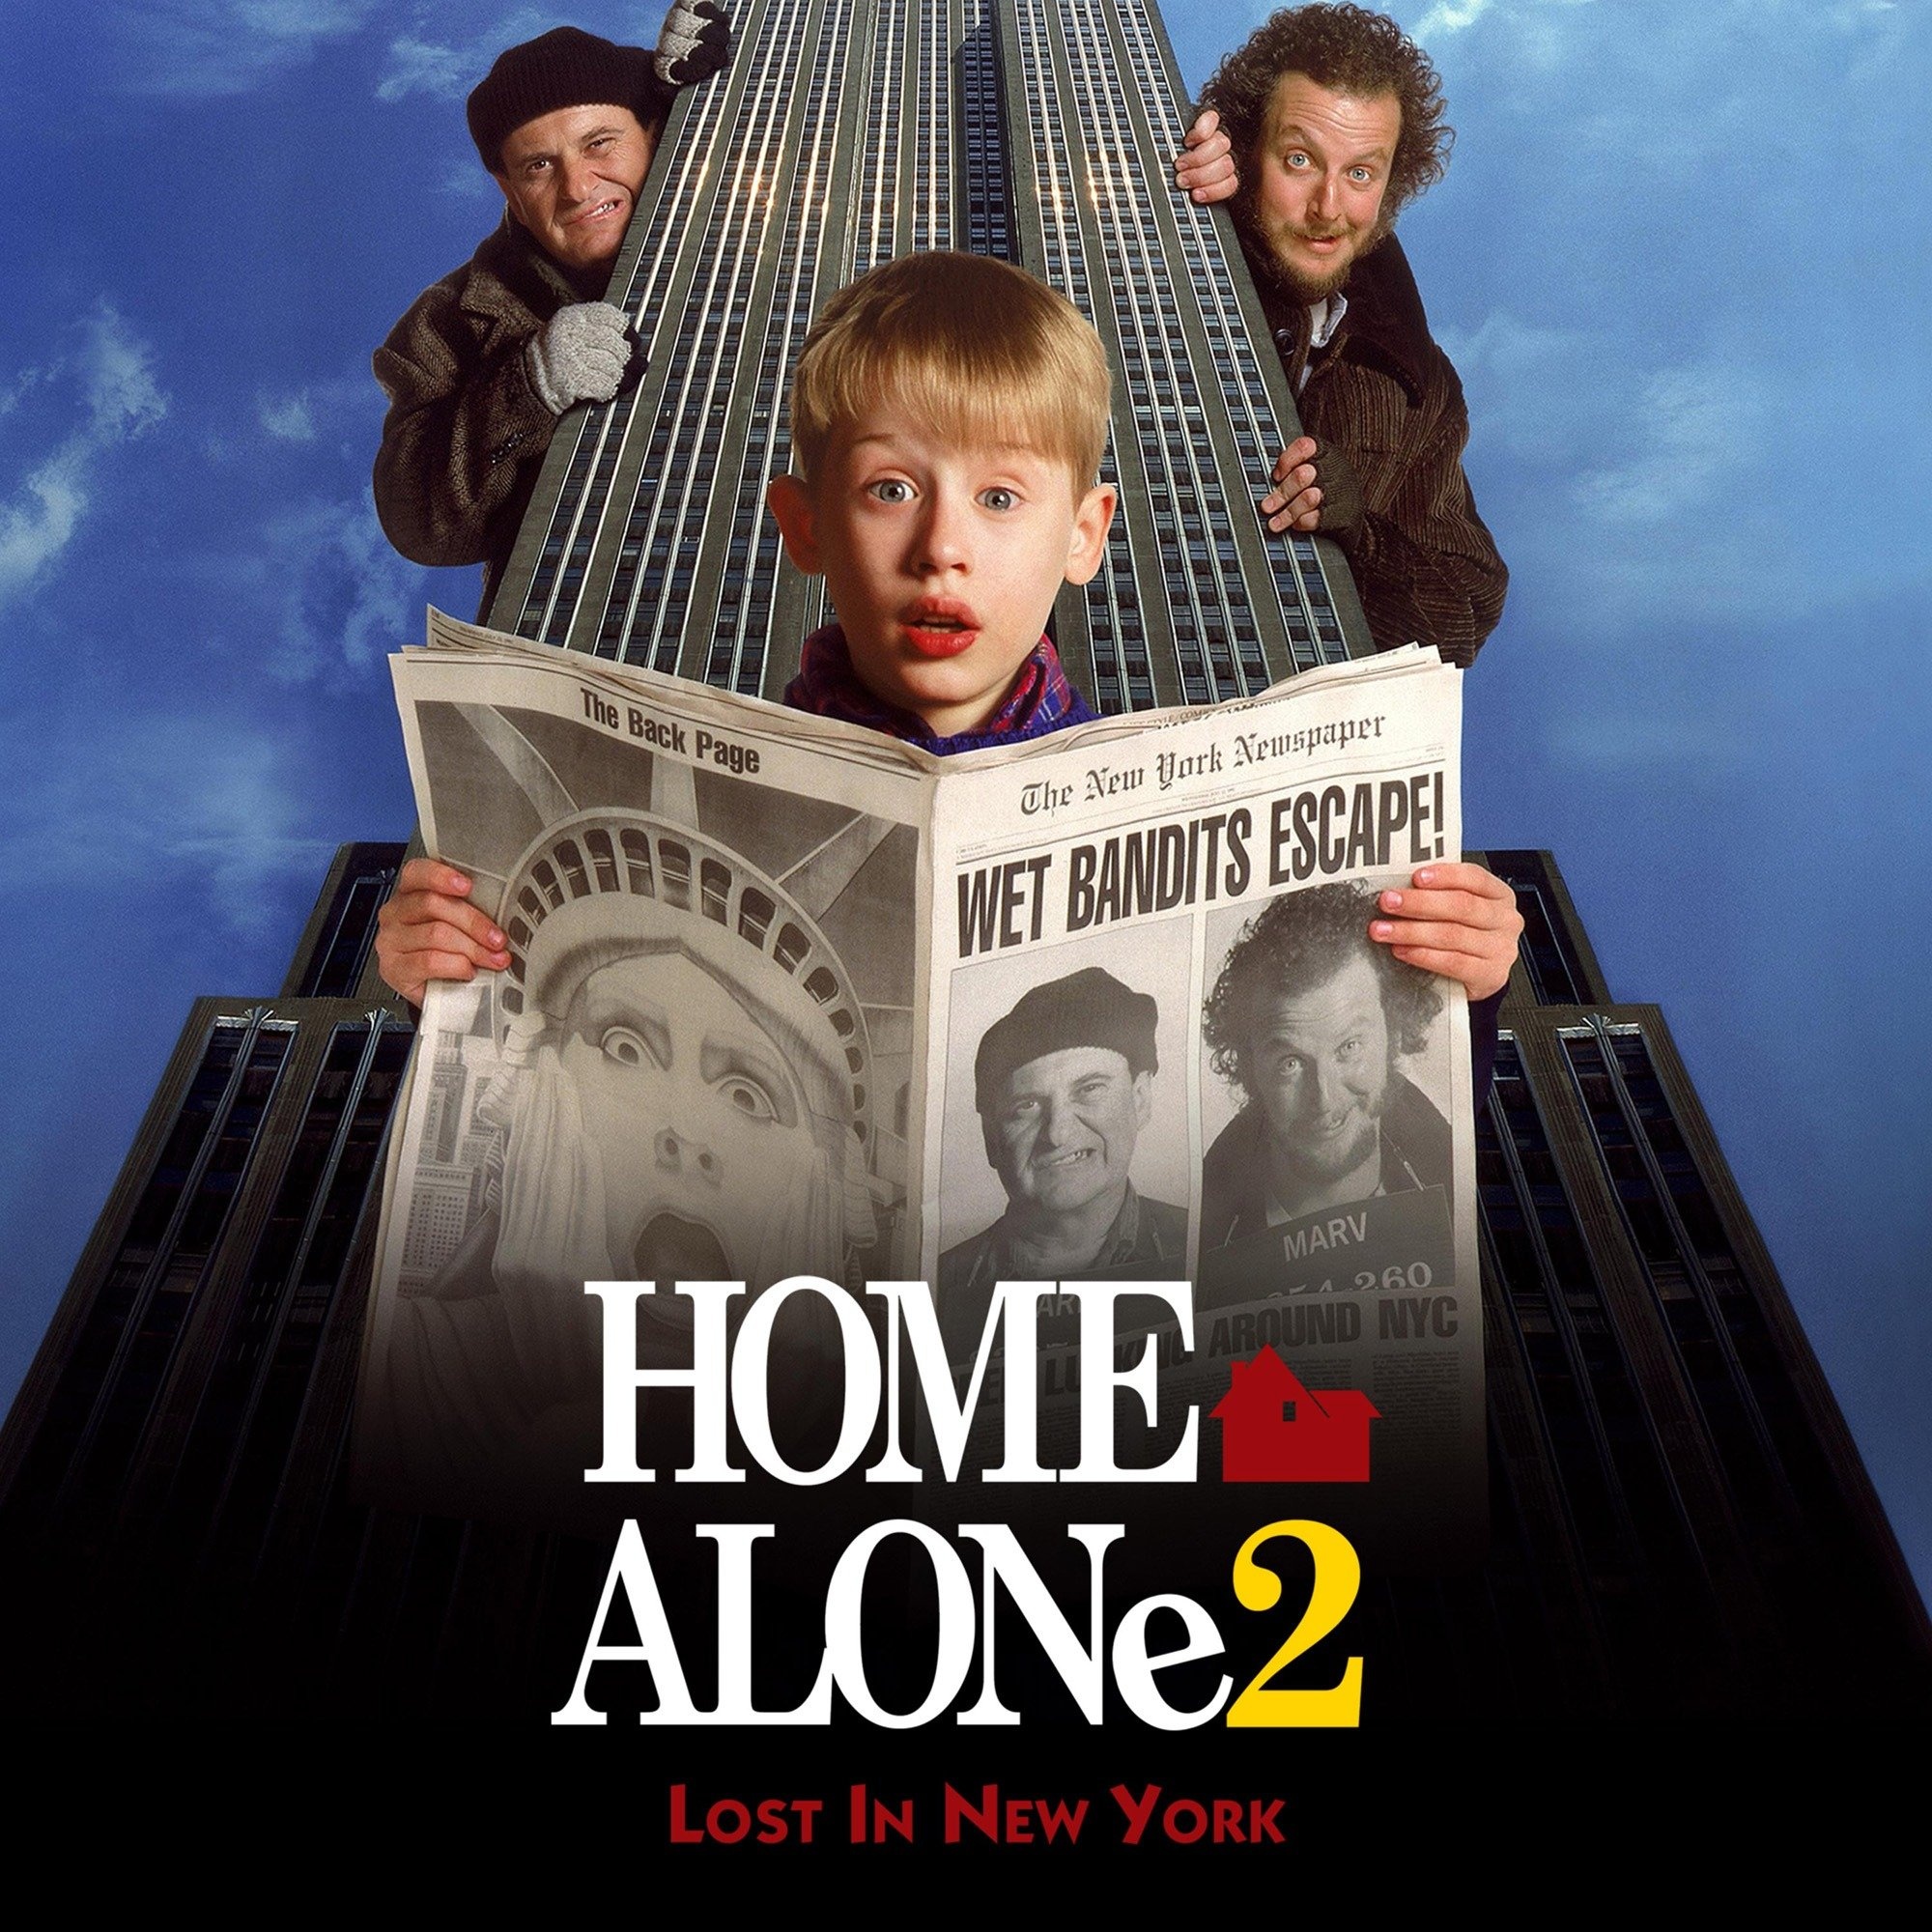 Home Alone 2, Online movie streaming, Kevin McCallister's New York adventure, Fun-filled comedy, 2000x2000 HD Handy